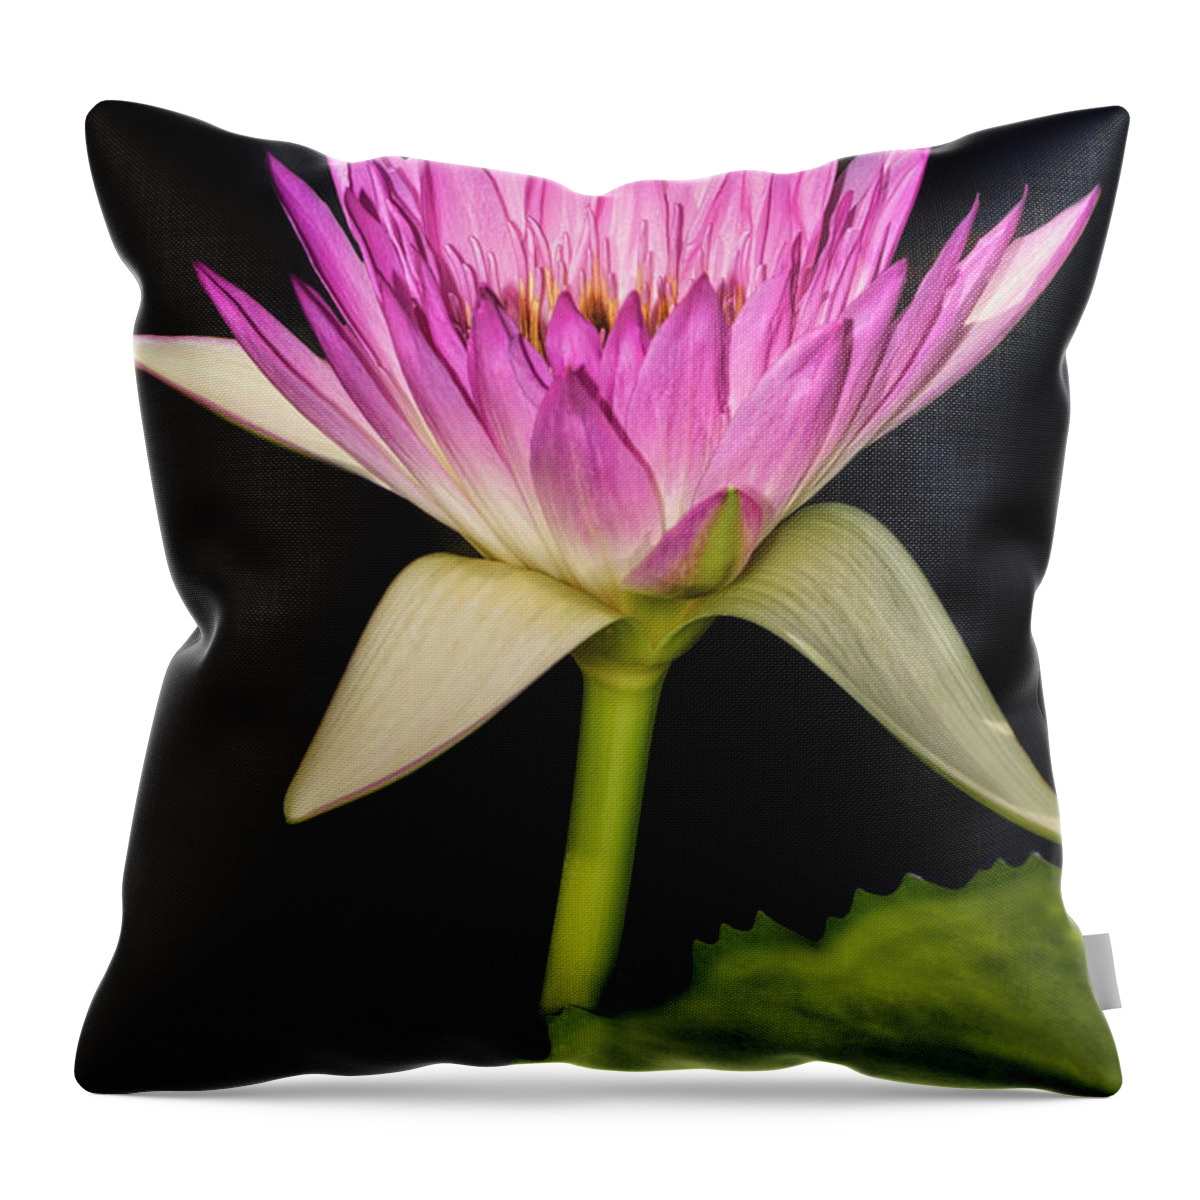 Waterlillies Throw Pillow featuring the photograph Pink Waterlily by Susan Candelario